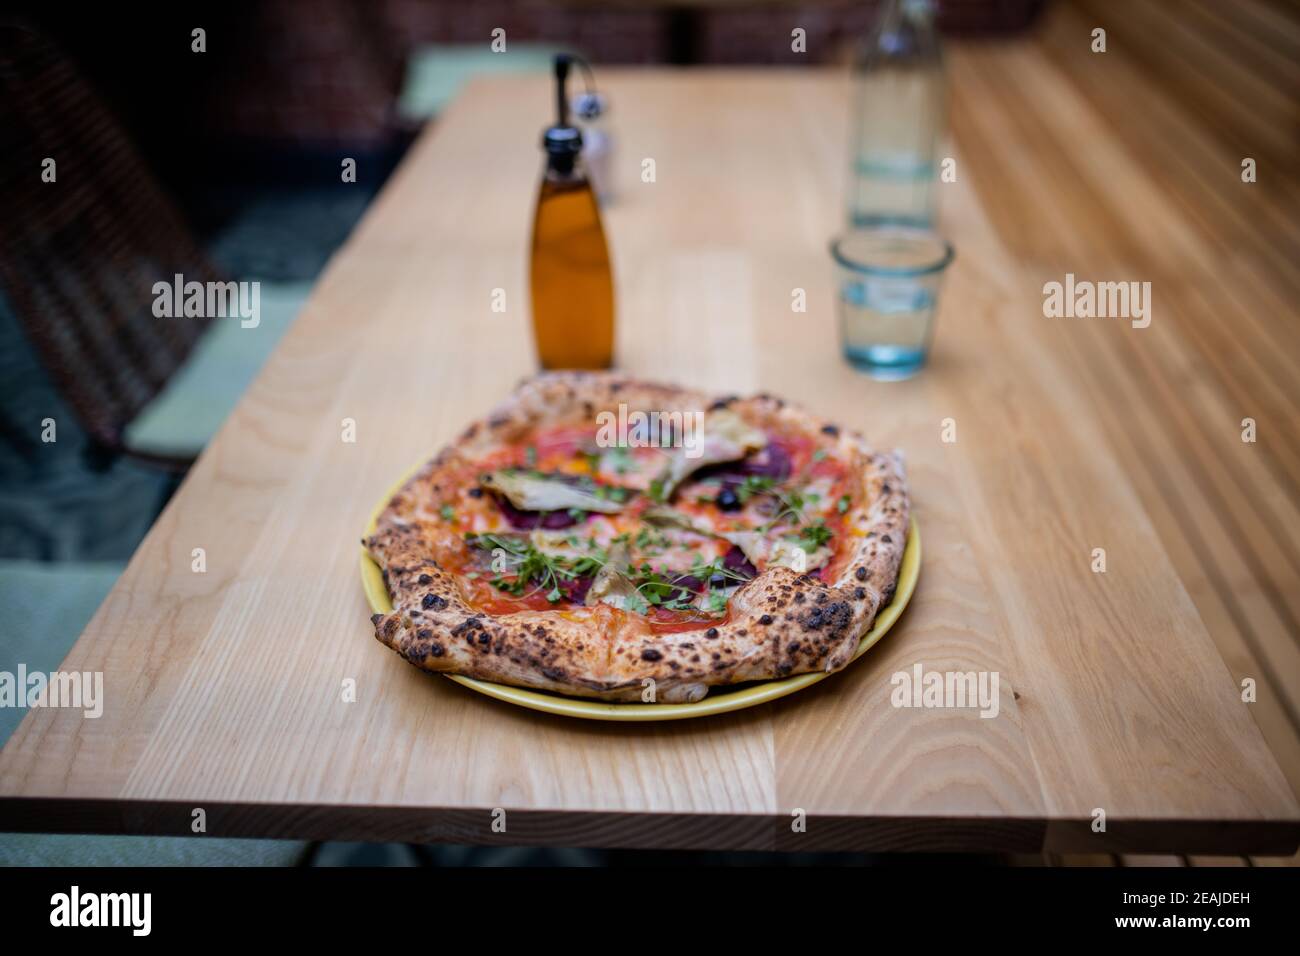 Vegan pizza on a table alongside a bottle of dressing and a glass of water Stock Photo